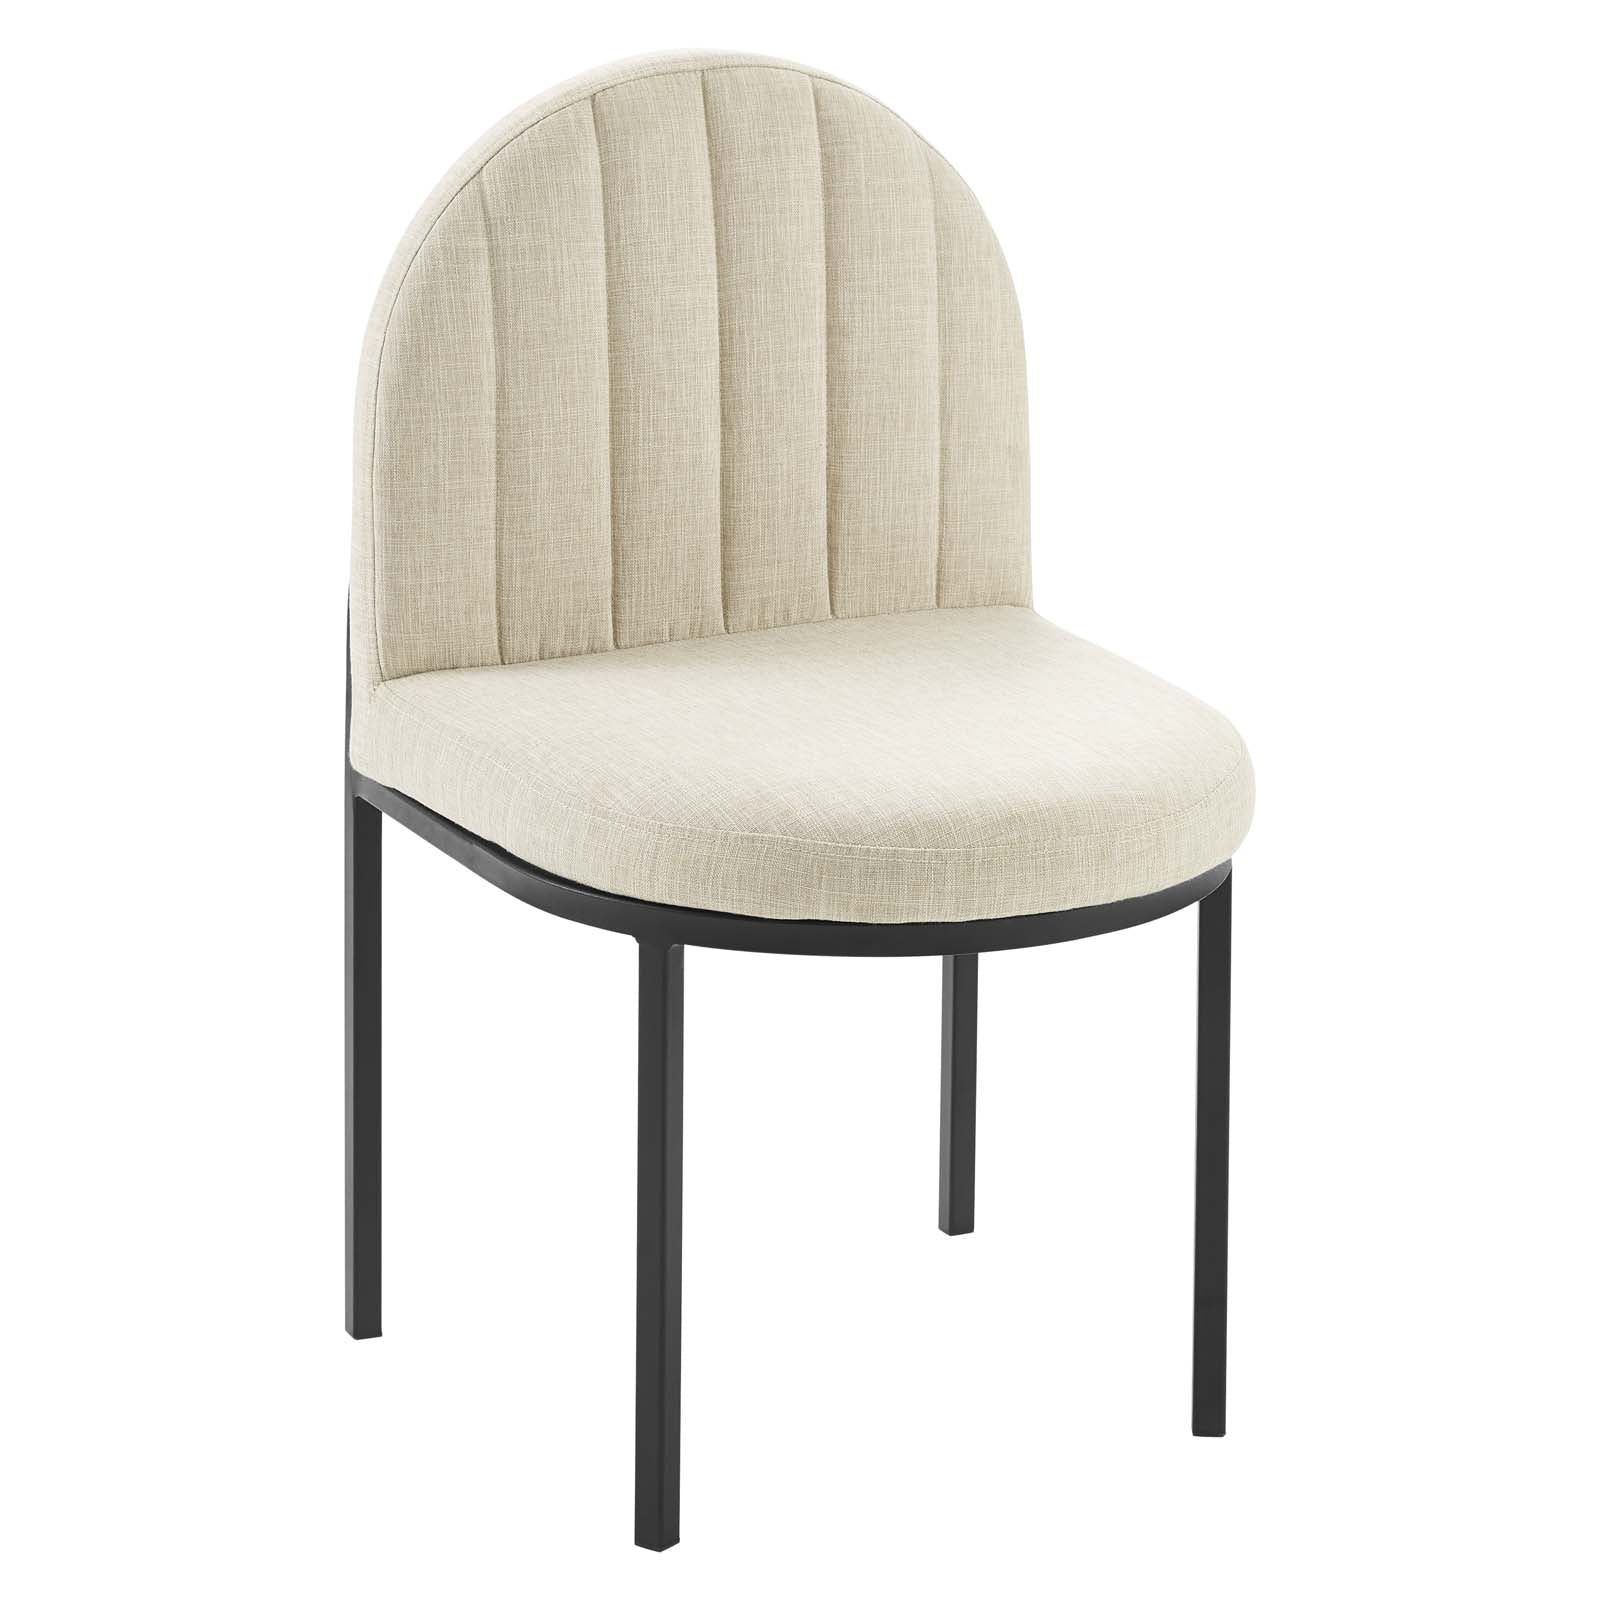 Isla Channel Tufted Upholstered Fabric Dining Side Chair